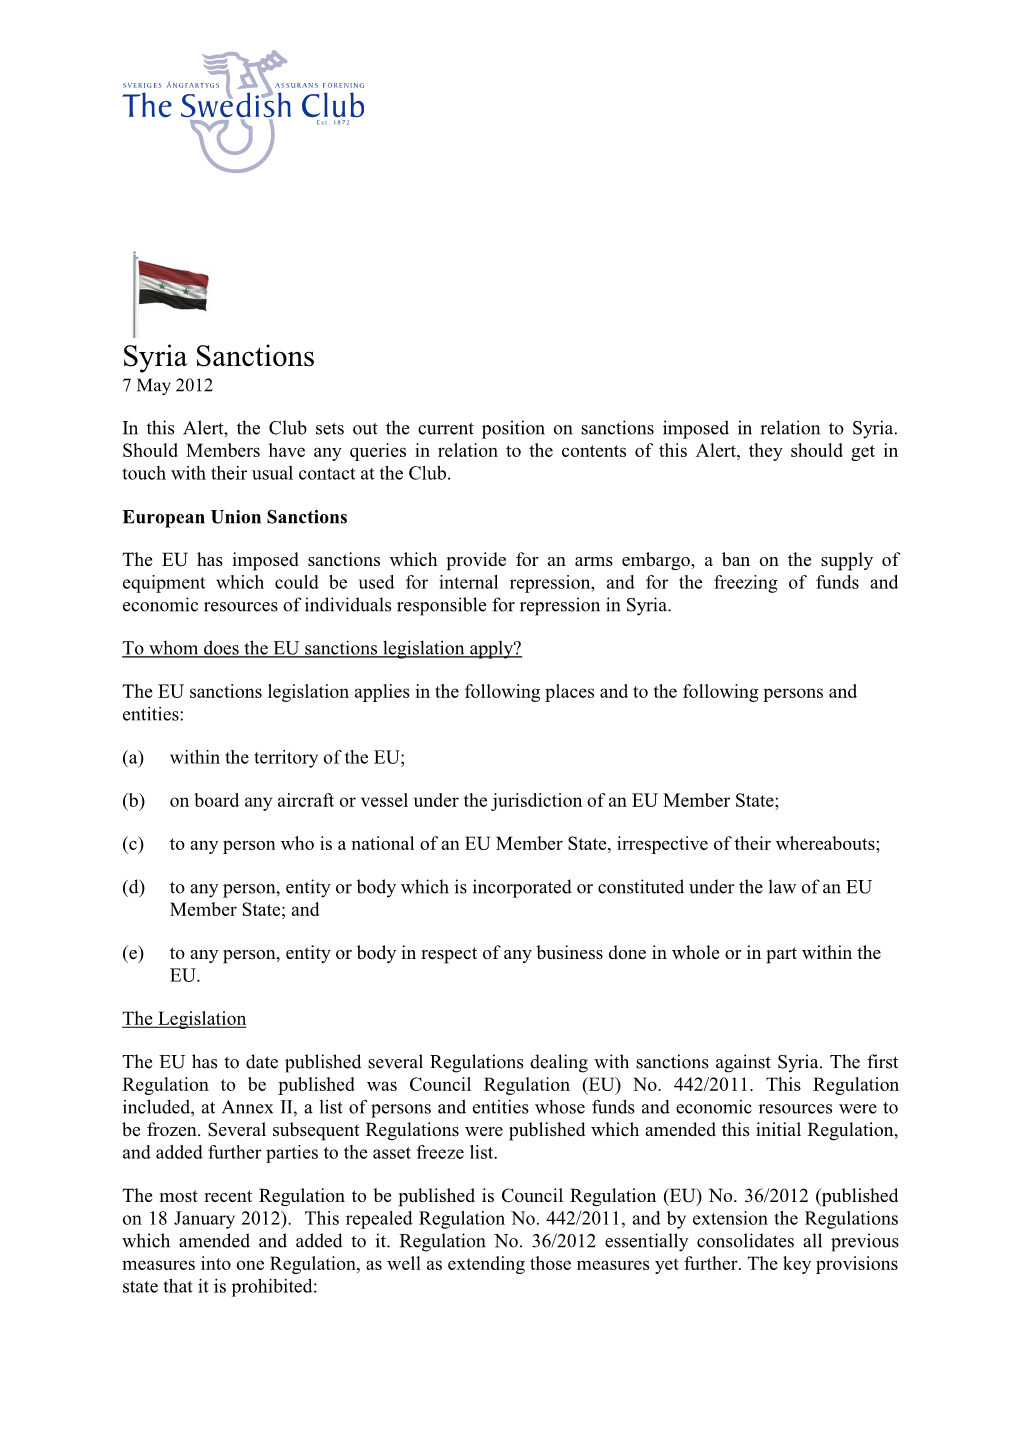 Syria Sanctions 7 May 2012